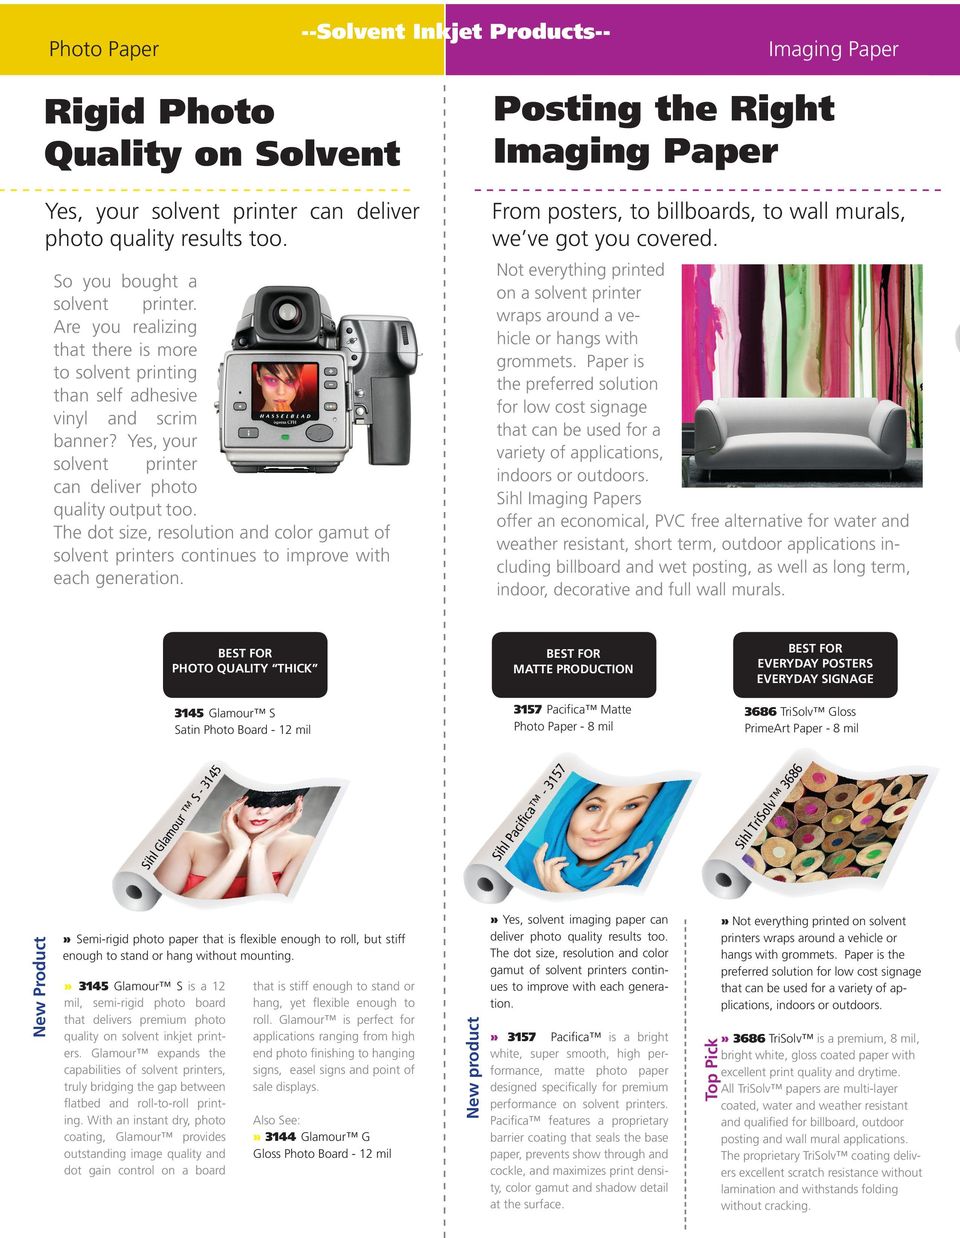 The dot size, resolution and color gamut of solvent printers continues to improve with each generation.